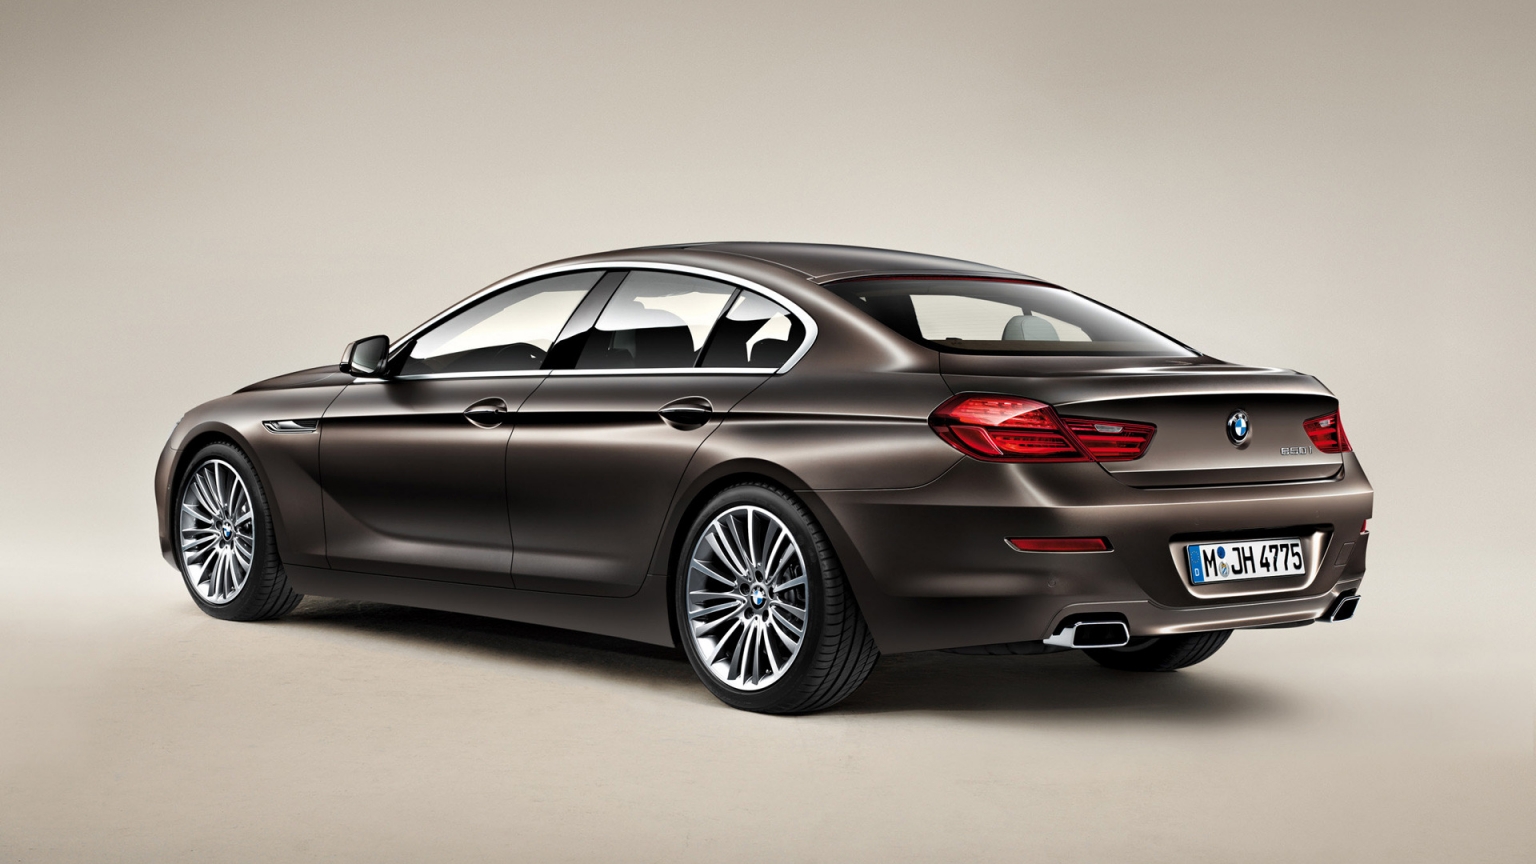 2013 BMW 6 Series Rear for 1536 x 864 HDTV resolution